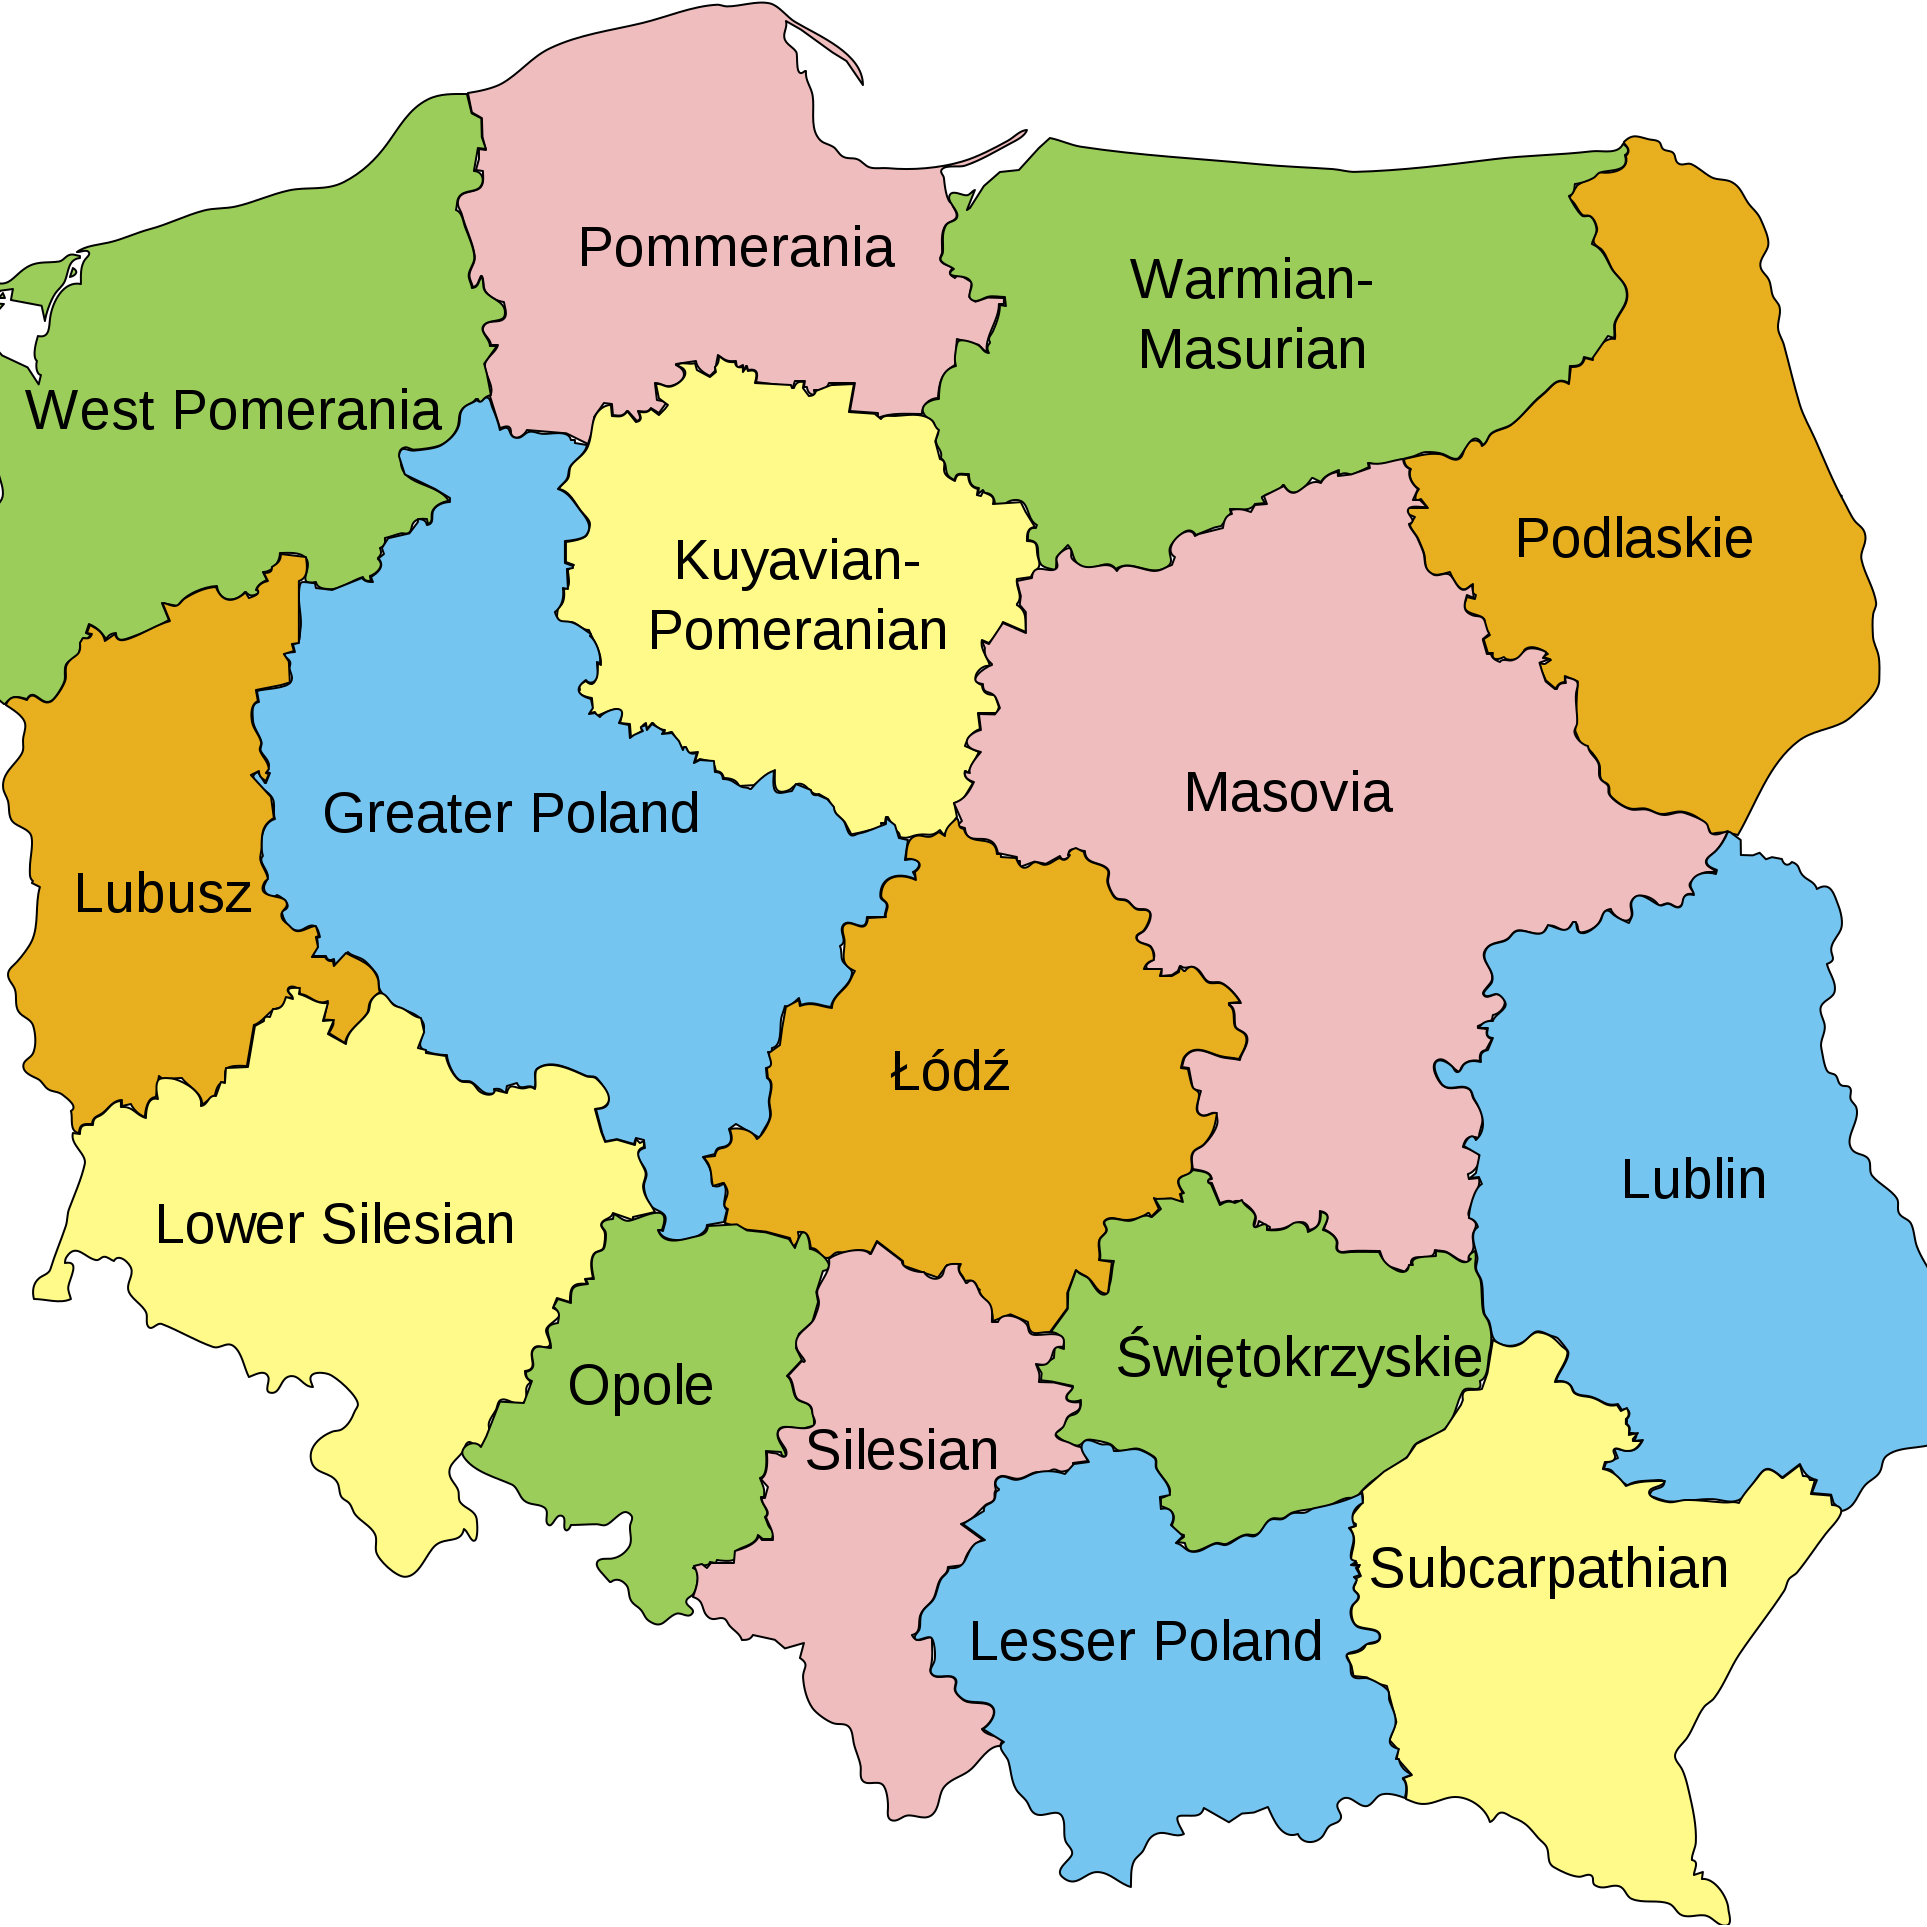 New development funds to help the regions of Poland